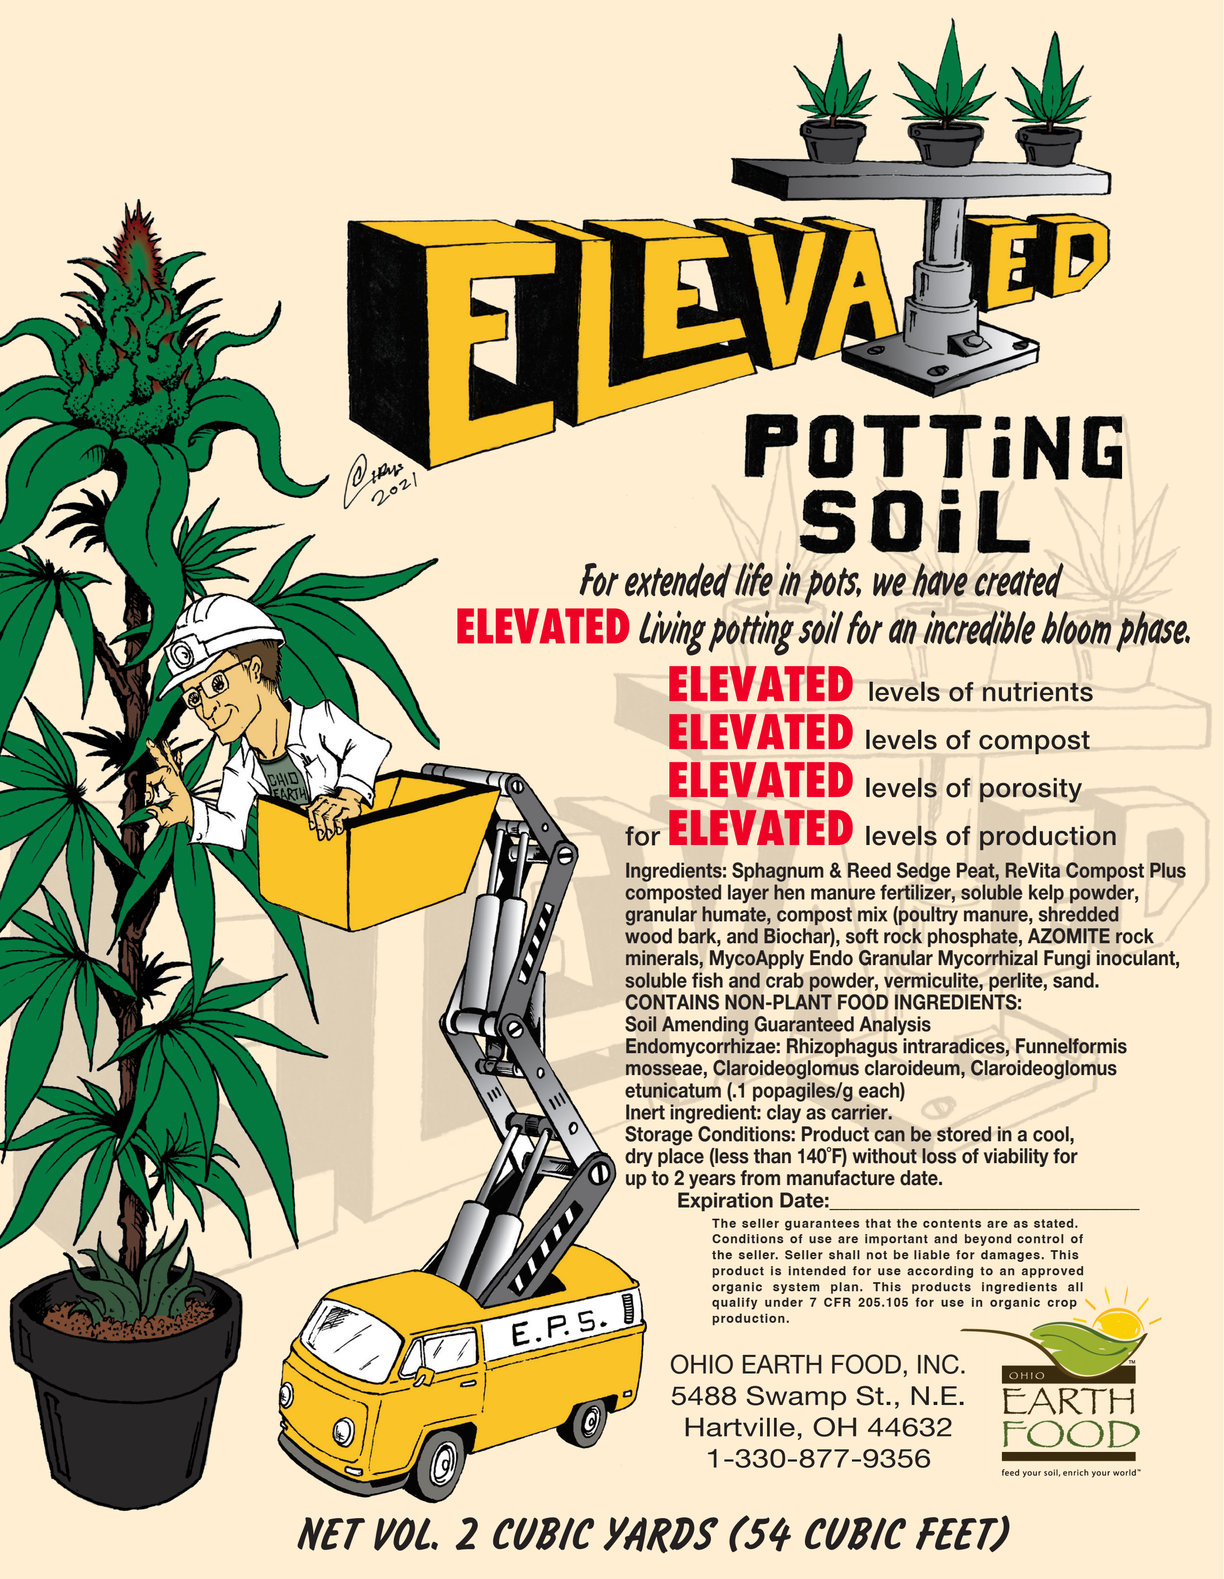 Elevated Potting Soil -the perfect living soil for organic cannabis